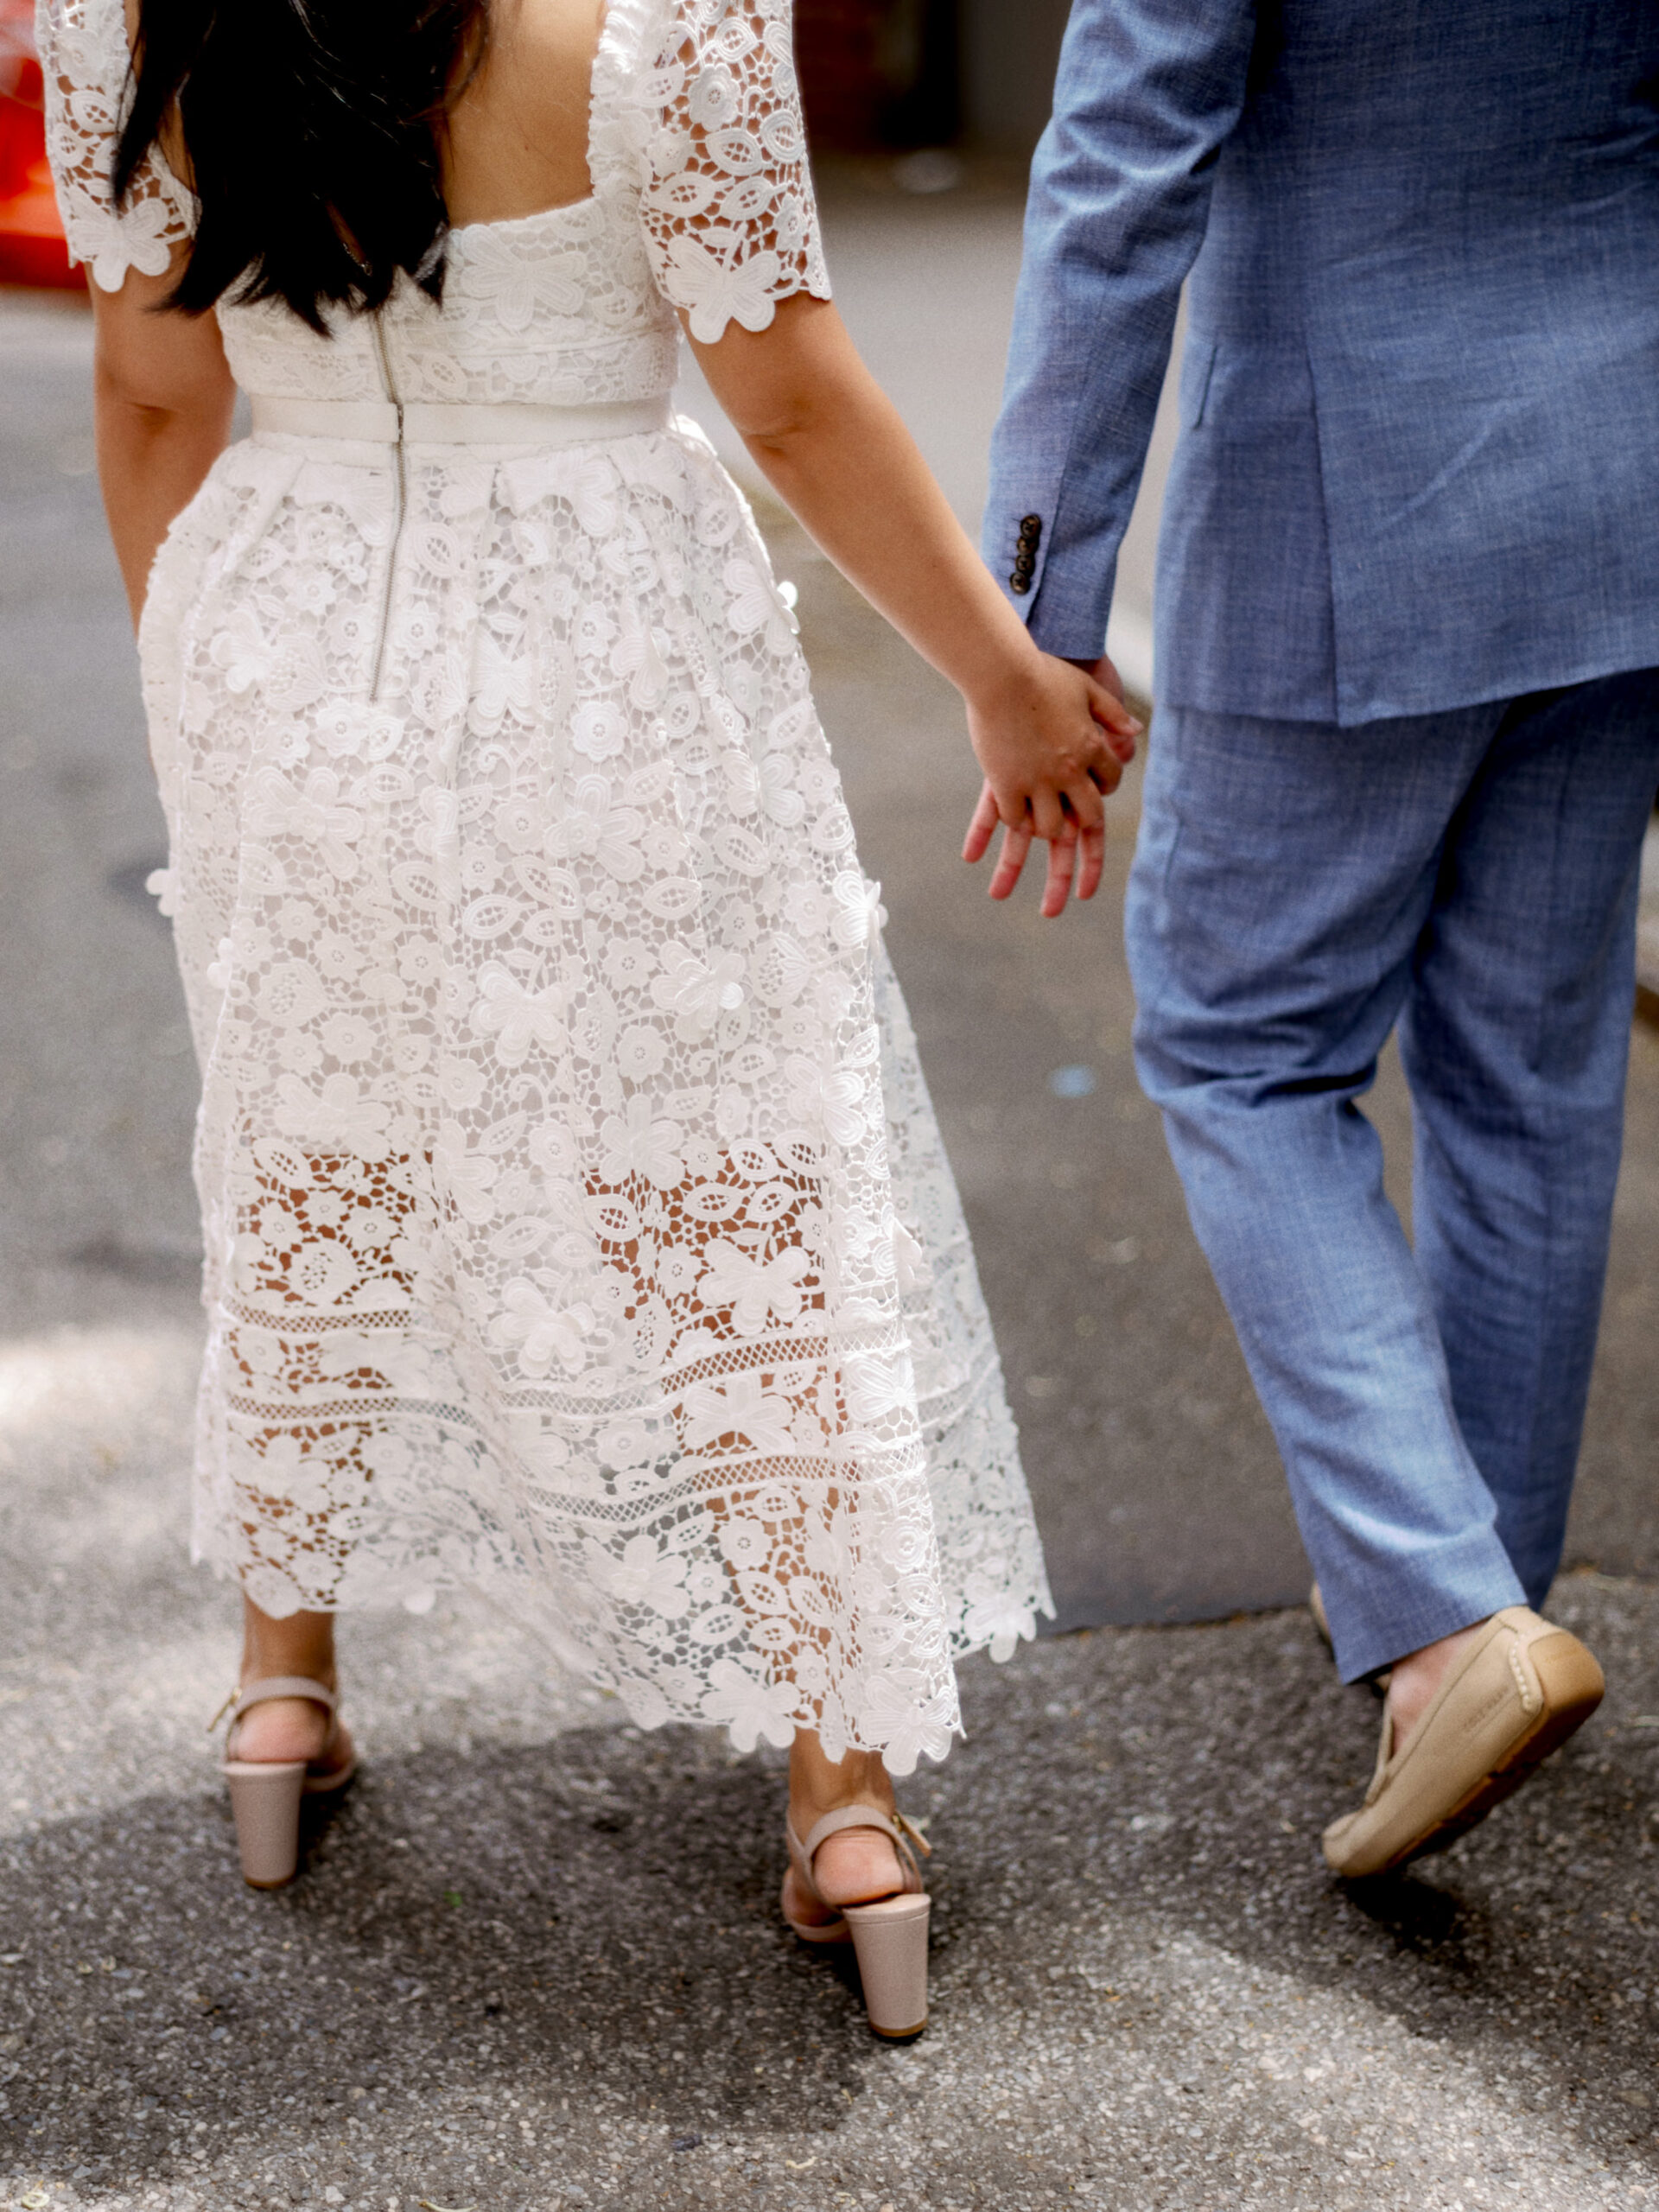 Lower half-body image of the engaged couple walking while holding hands. Image by Jenny Fu Studio